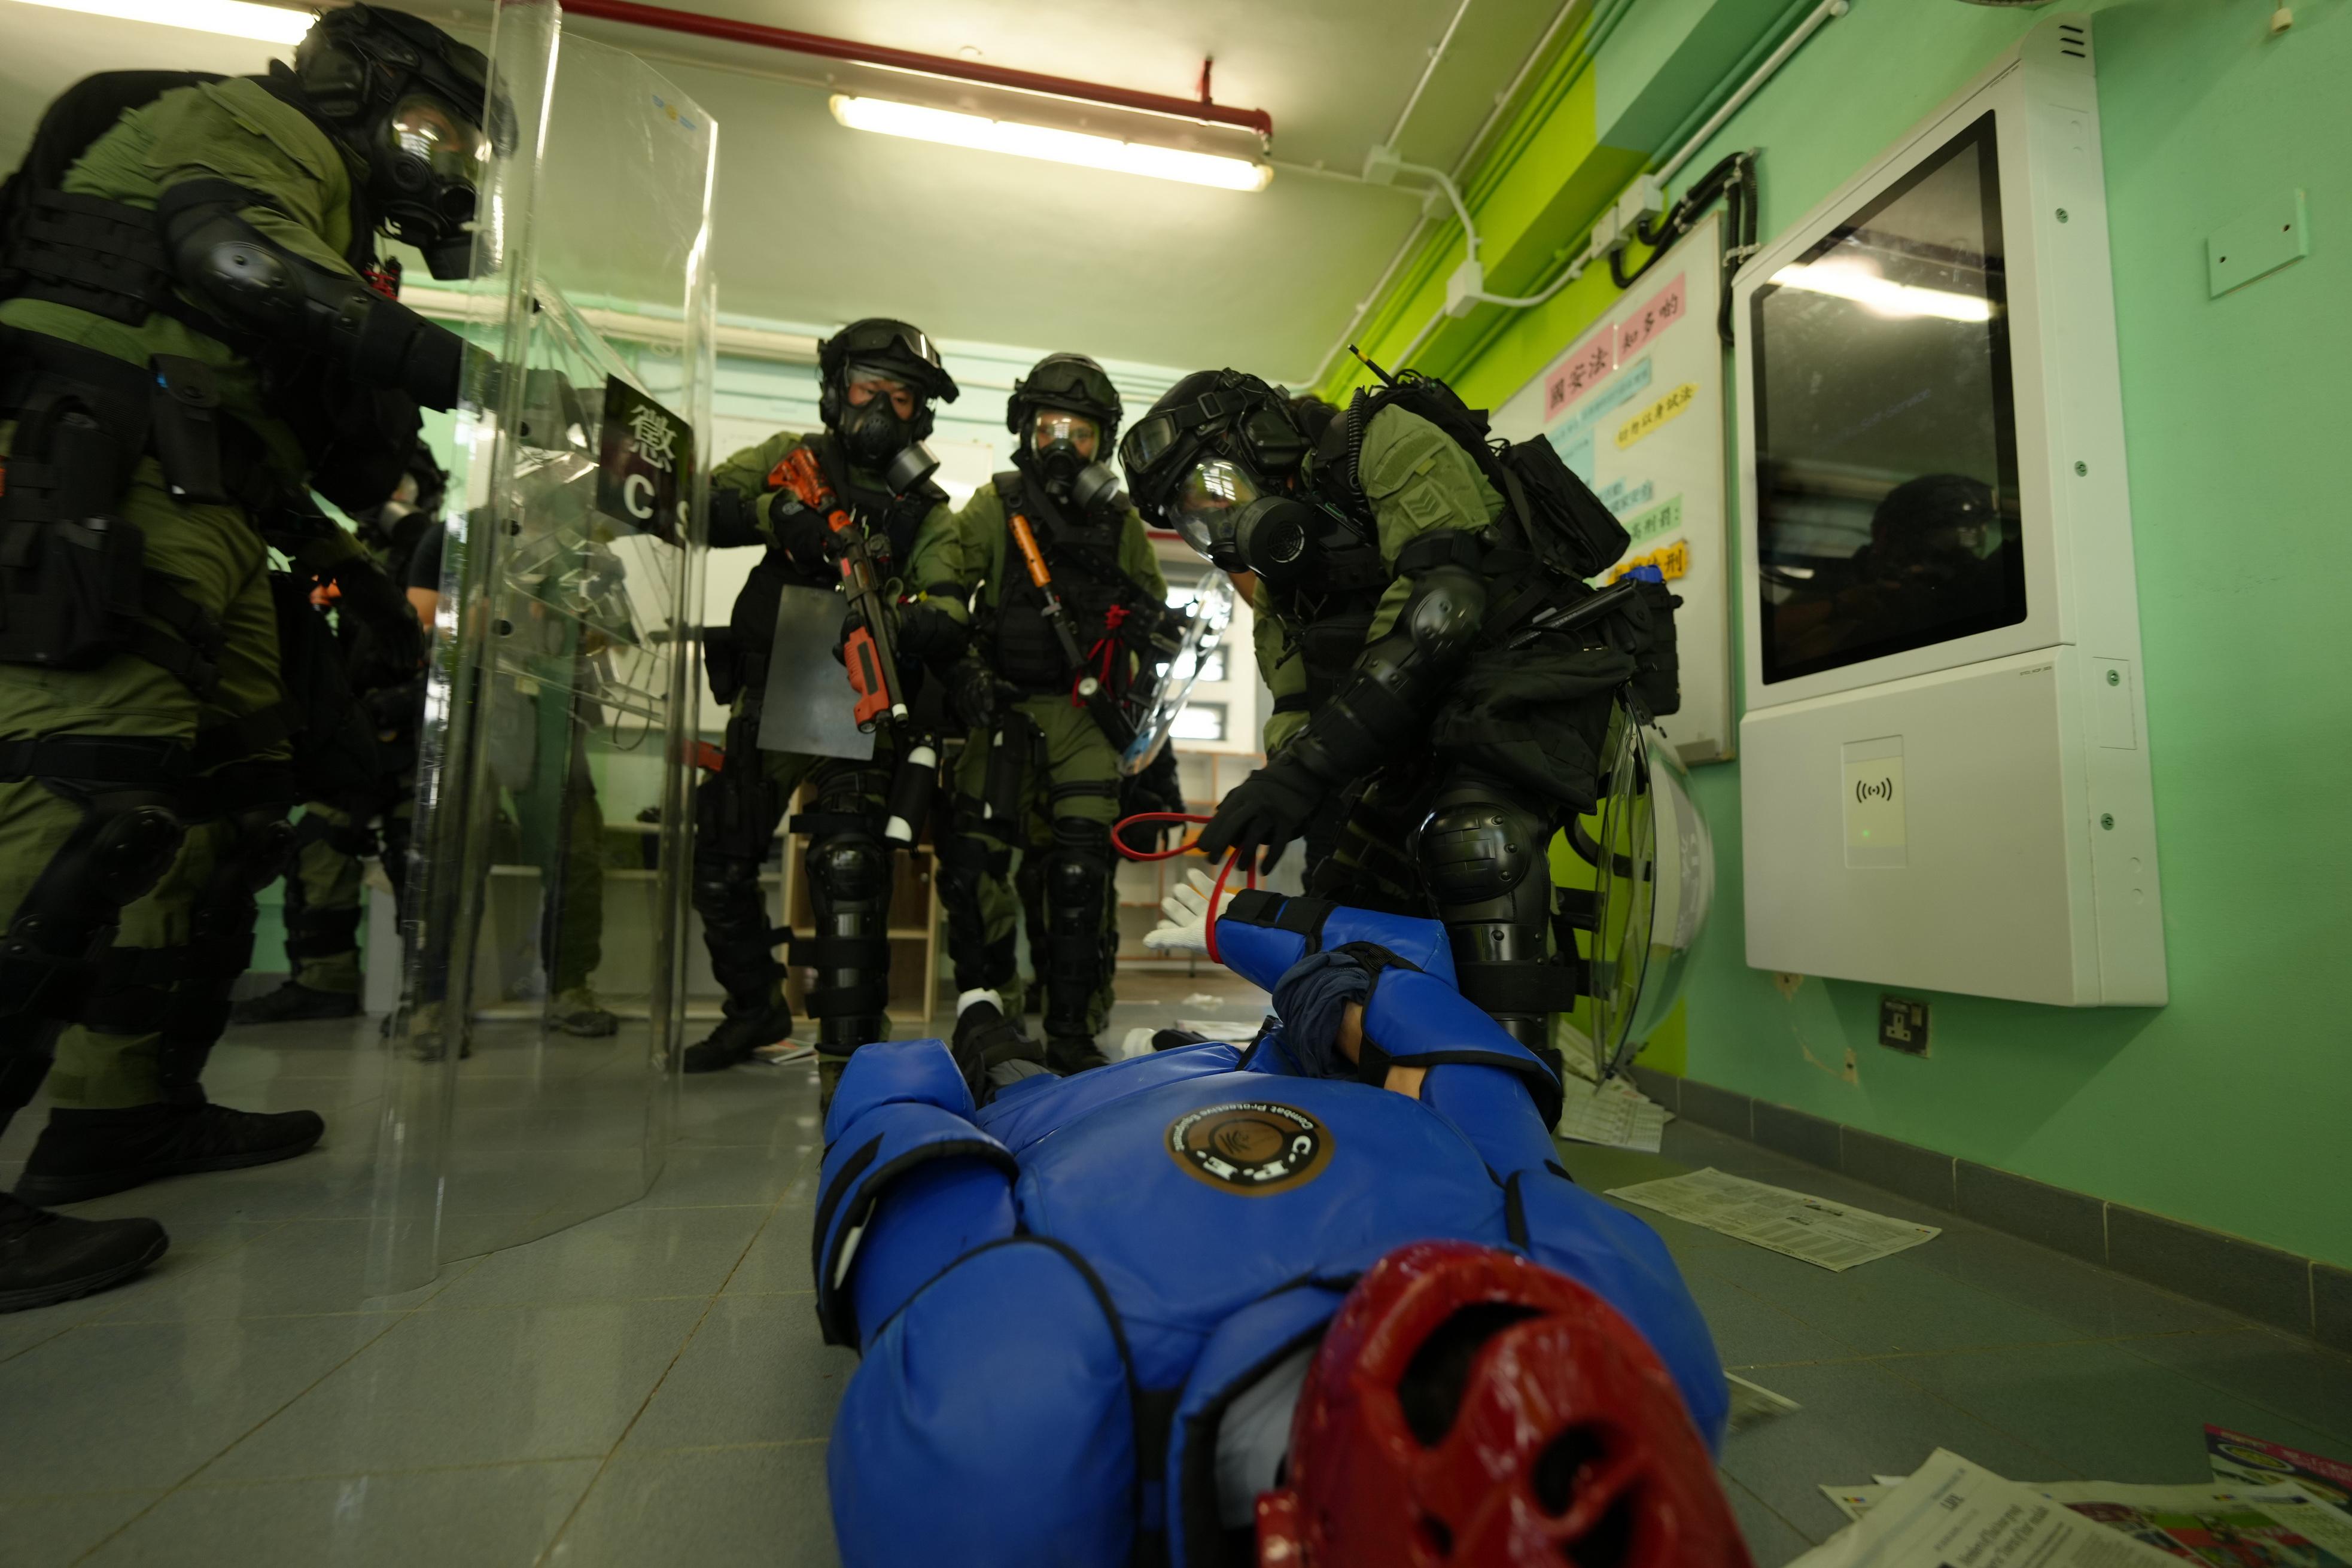 The Correctional Services Department (CSD) conducted an emergency exercise, code-named Concord XXI, today (November 30) to test the emergency response of its various units in different scenarios including mass indiscipline of persons in custody, a hostage-taking situation and members of the public attempting to damage correctional facilities at Sha Tsui Correctional Institution. Photo shows the CSD’s Regional Response Team subduing a person in custody who has violated discipline.